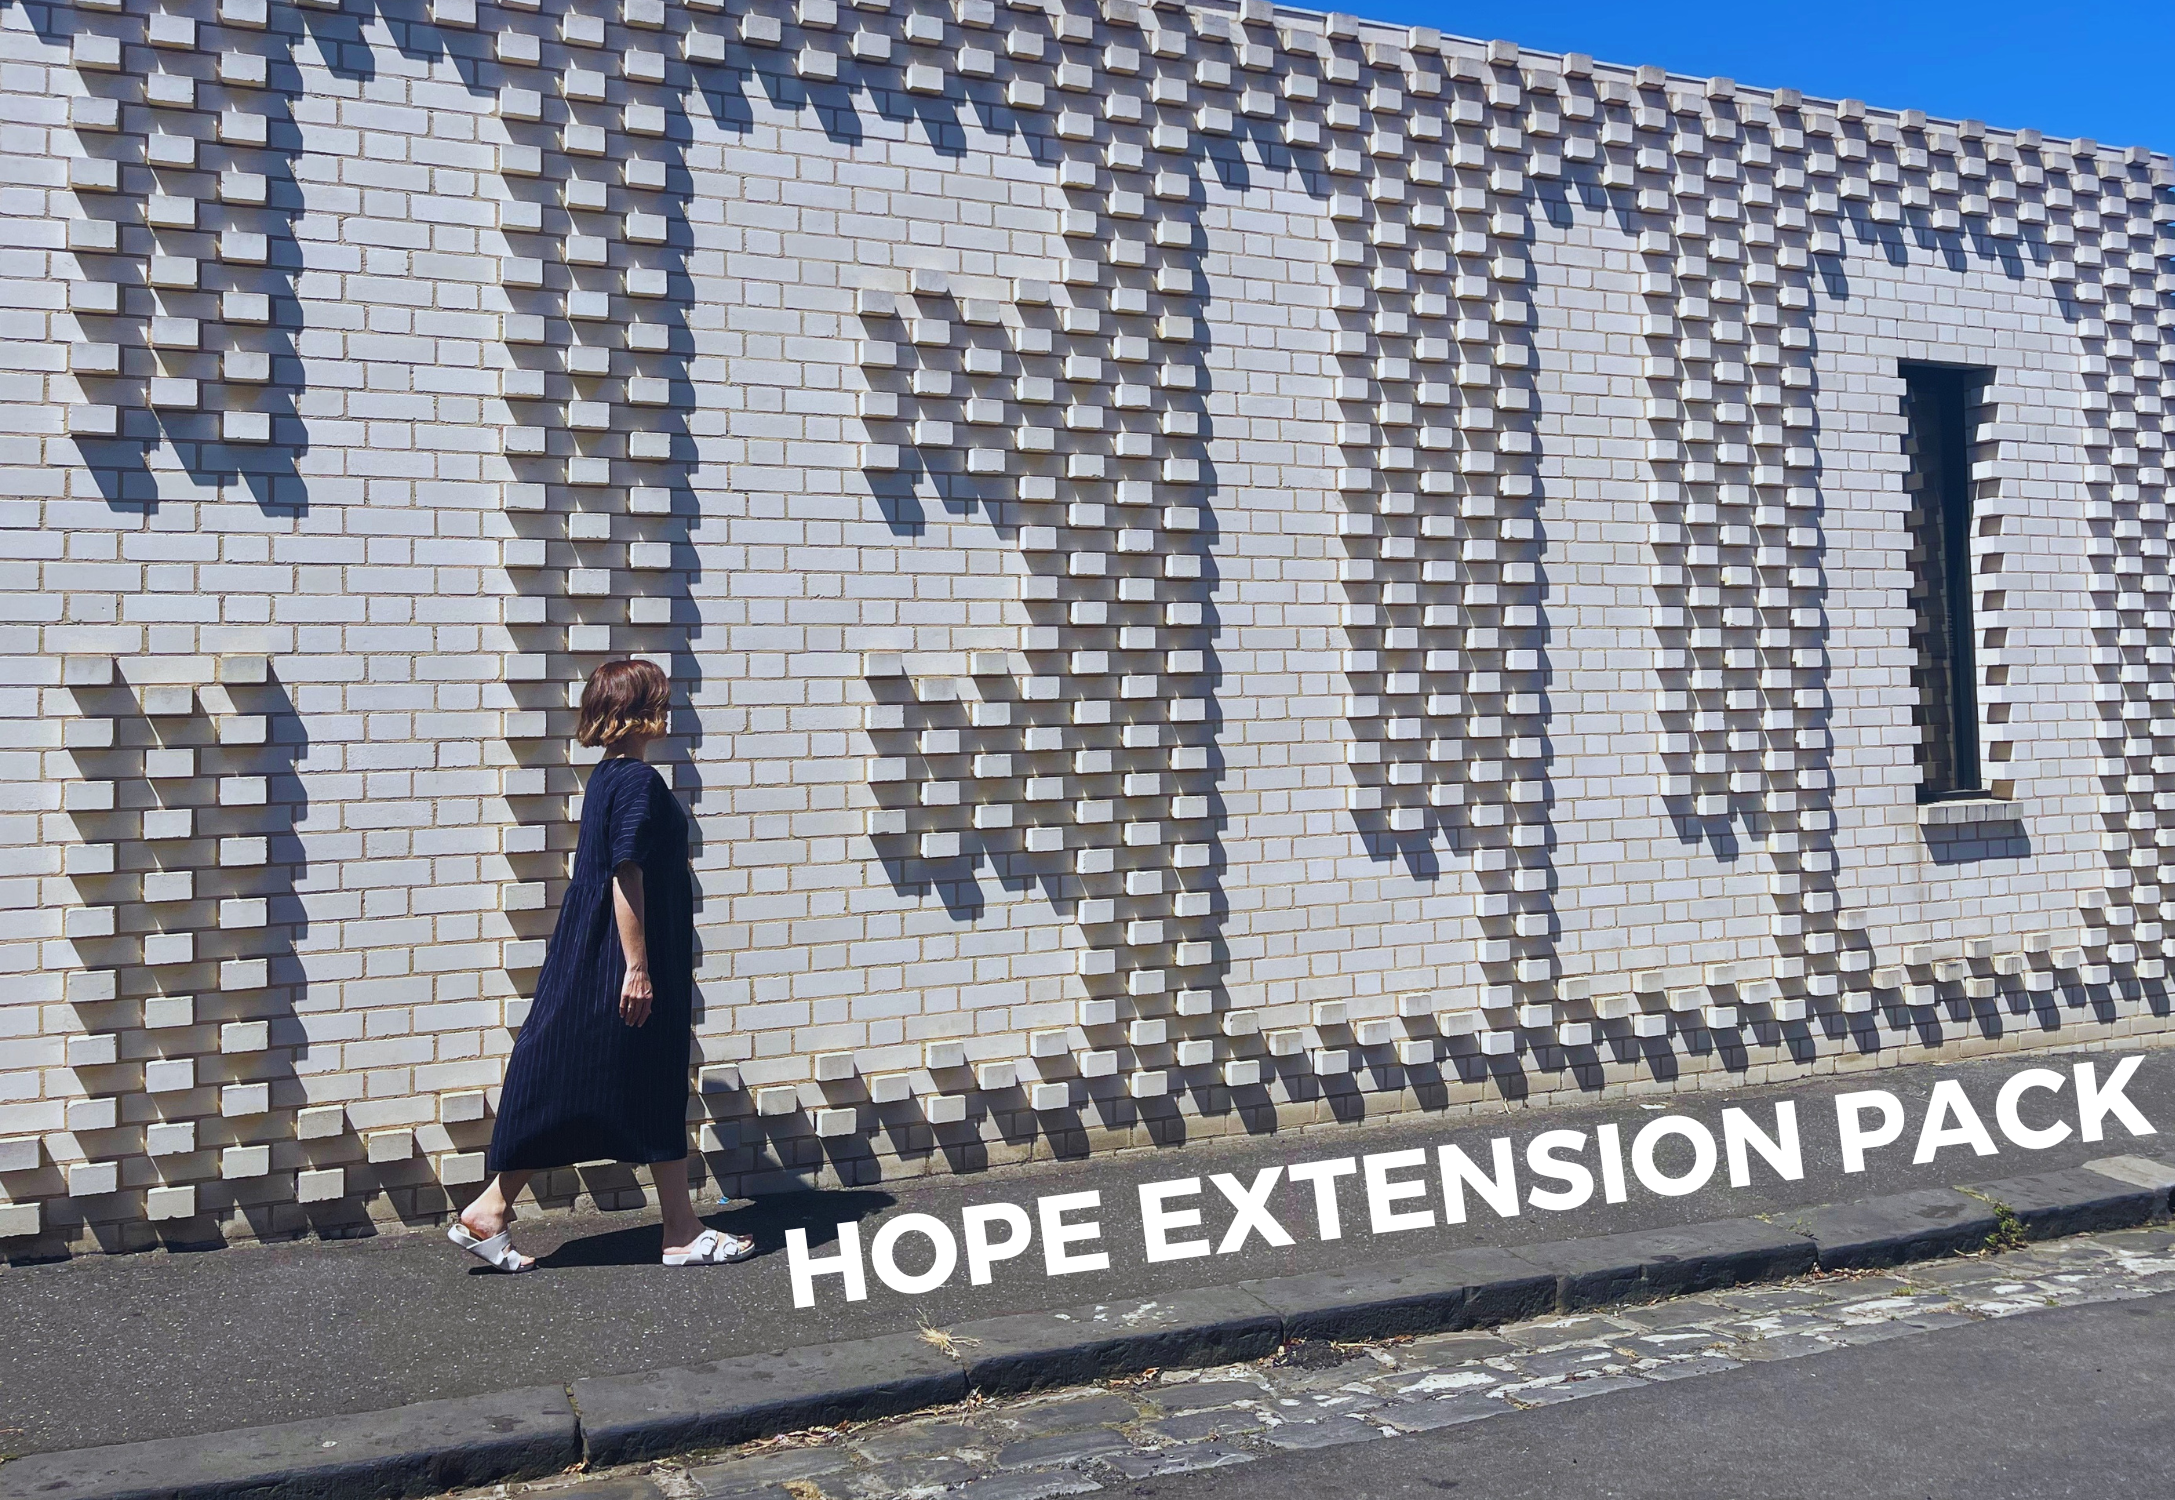 Hello Hope Extension Pack!